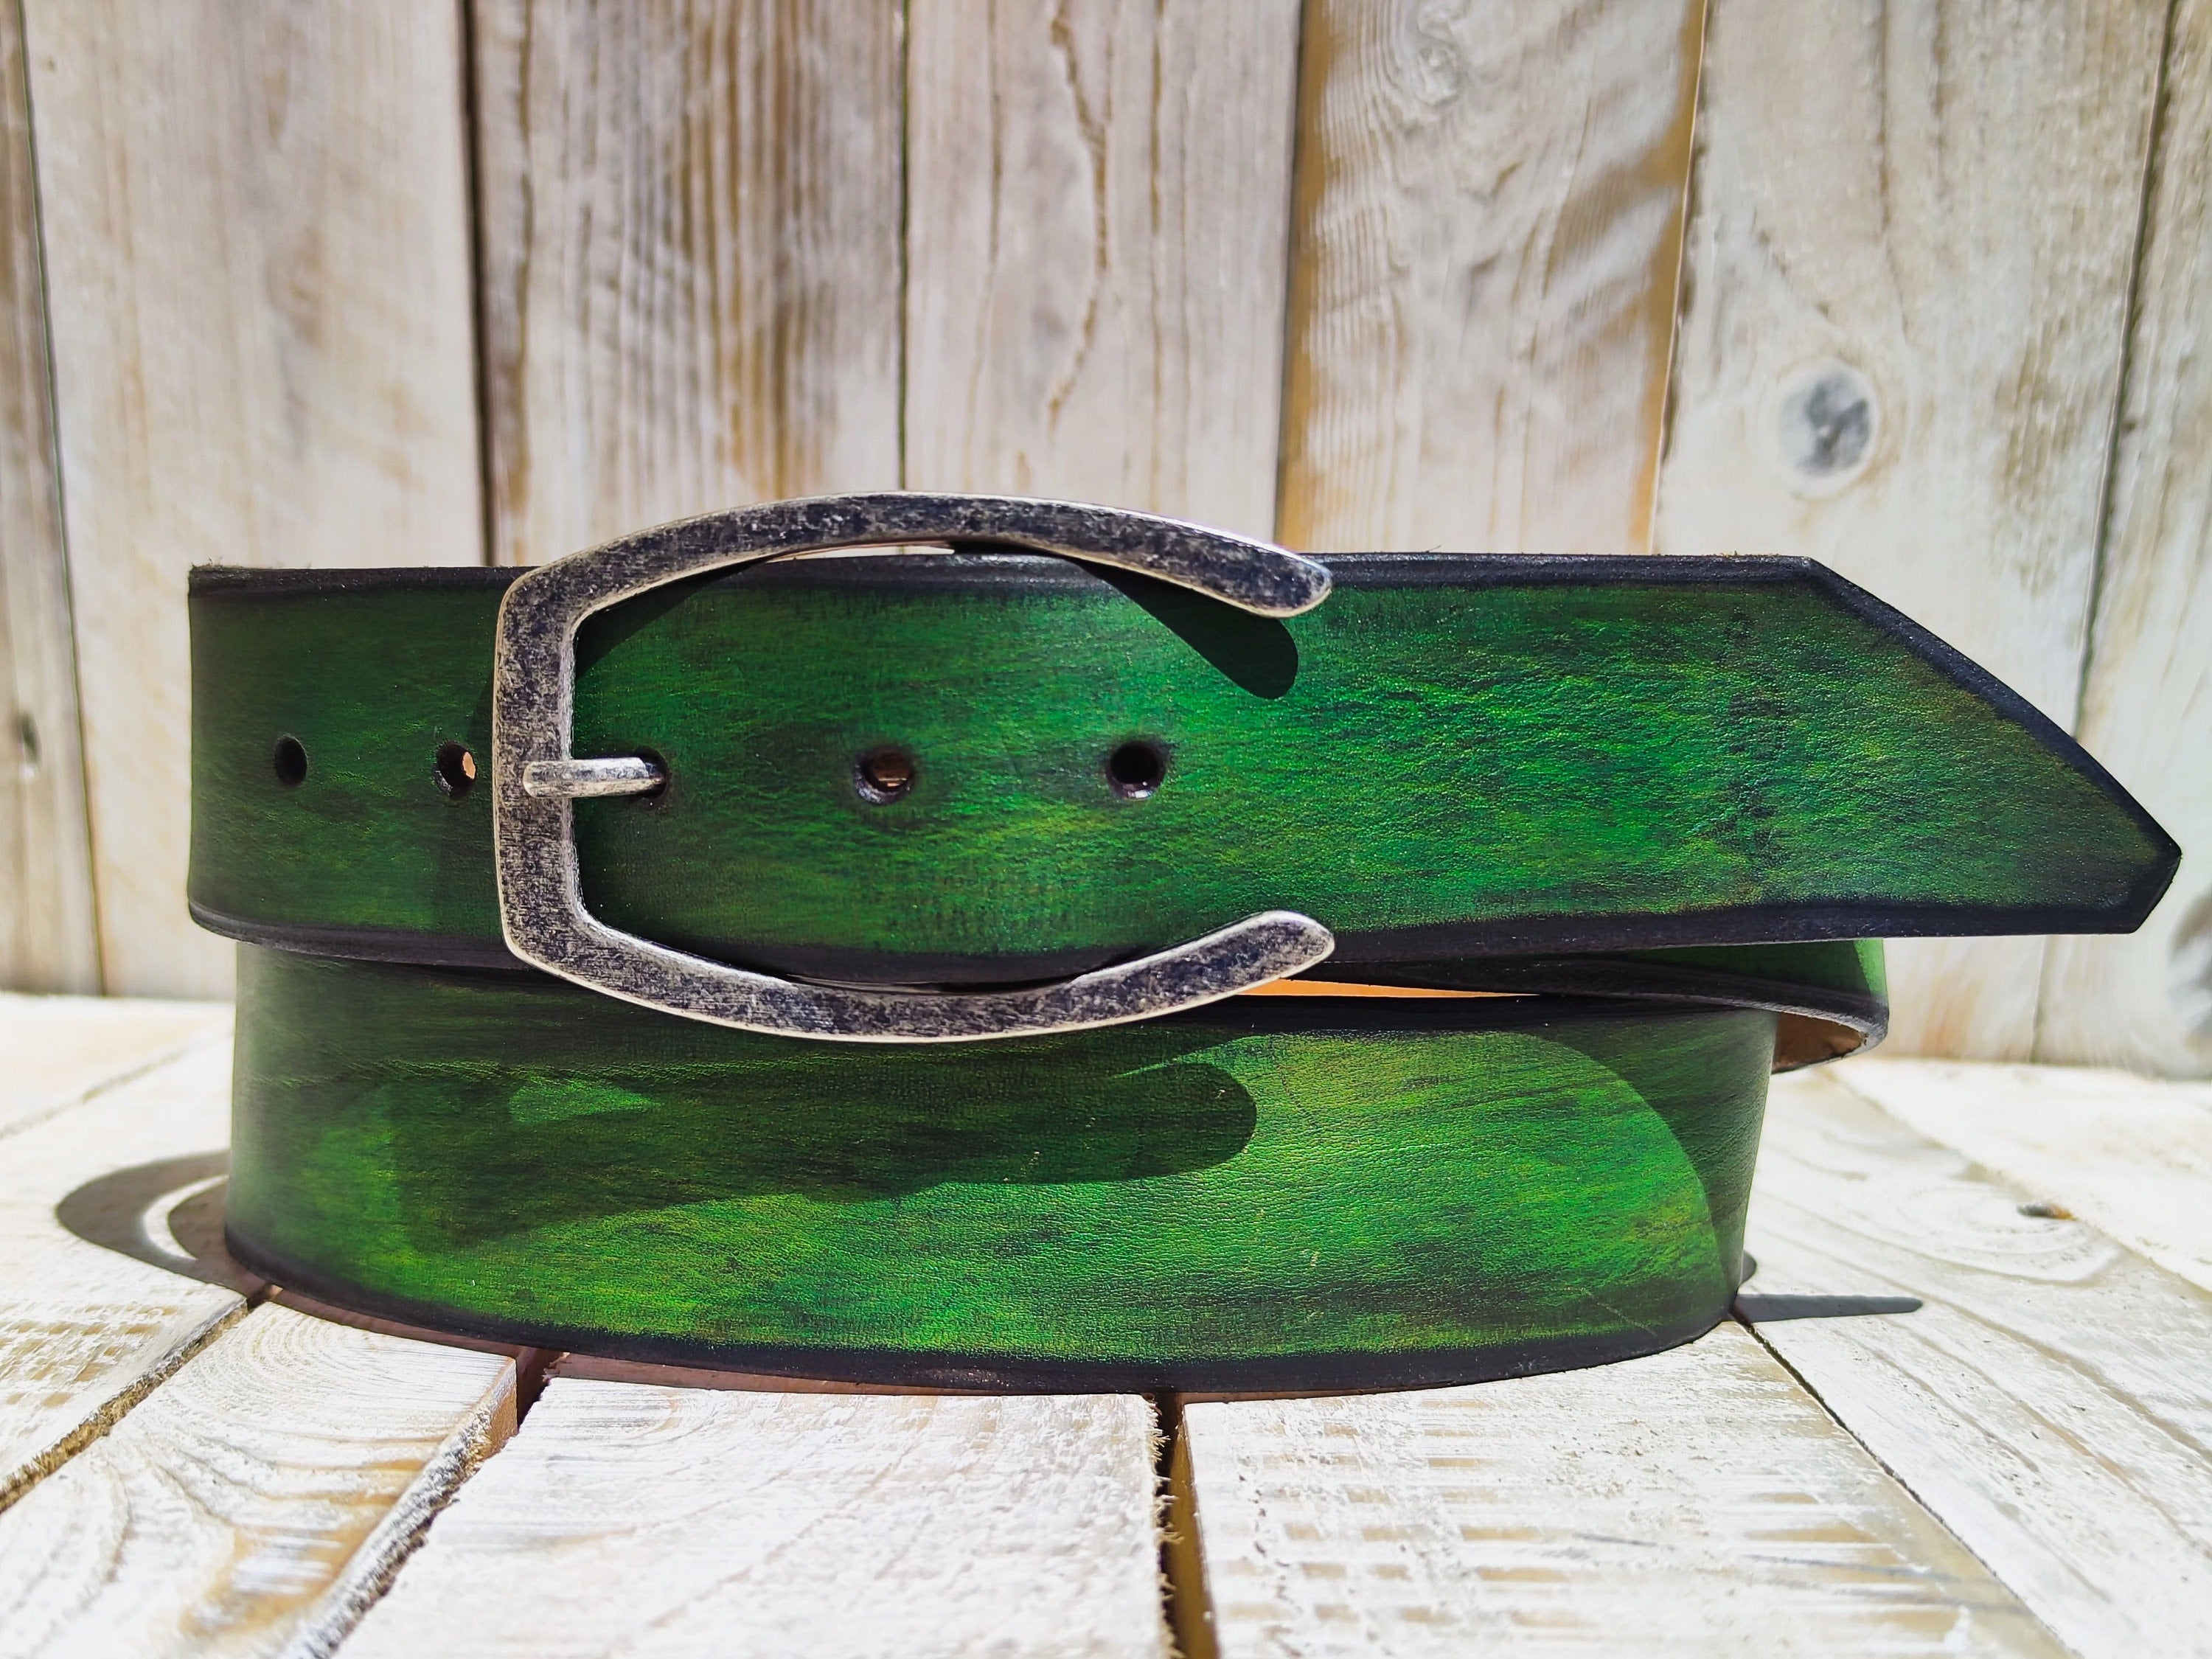 Artisanal Green Leather Belt: Handcrafted with Layers of